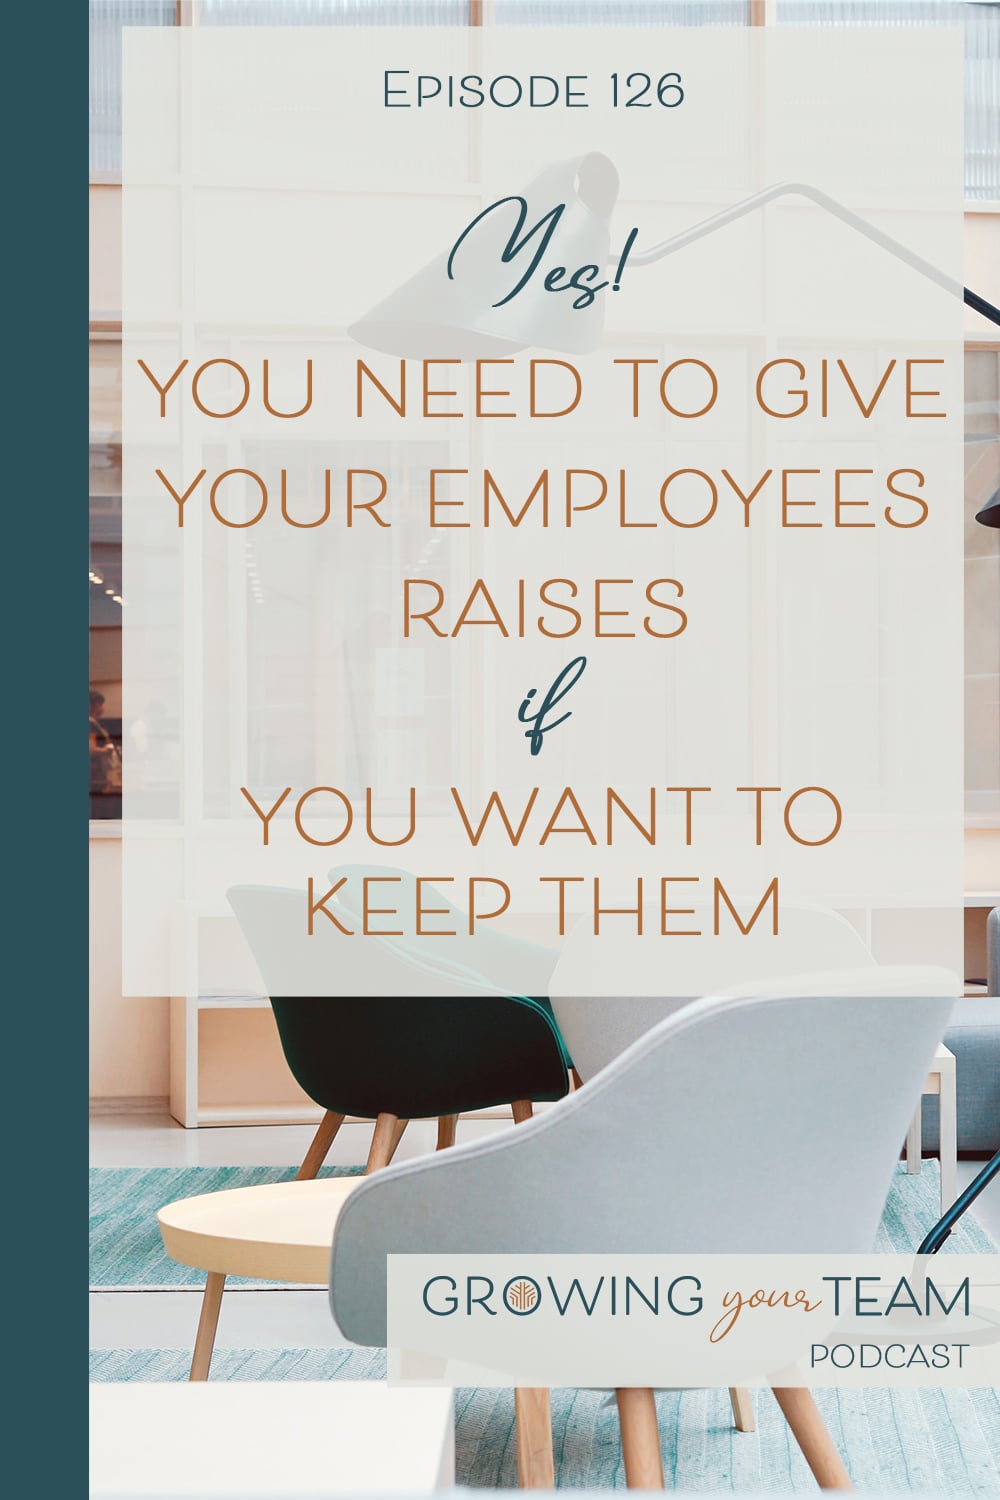 Give Your Employees Raises, Growing You Team Podcast, Jamie Van Cuyk, Small Business